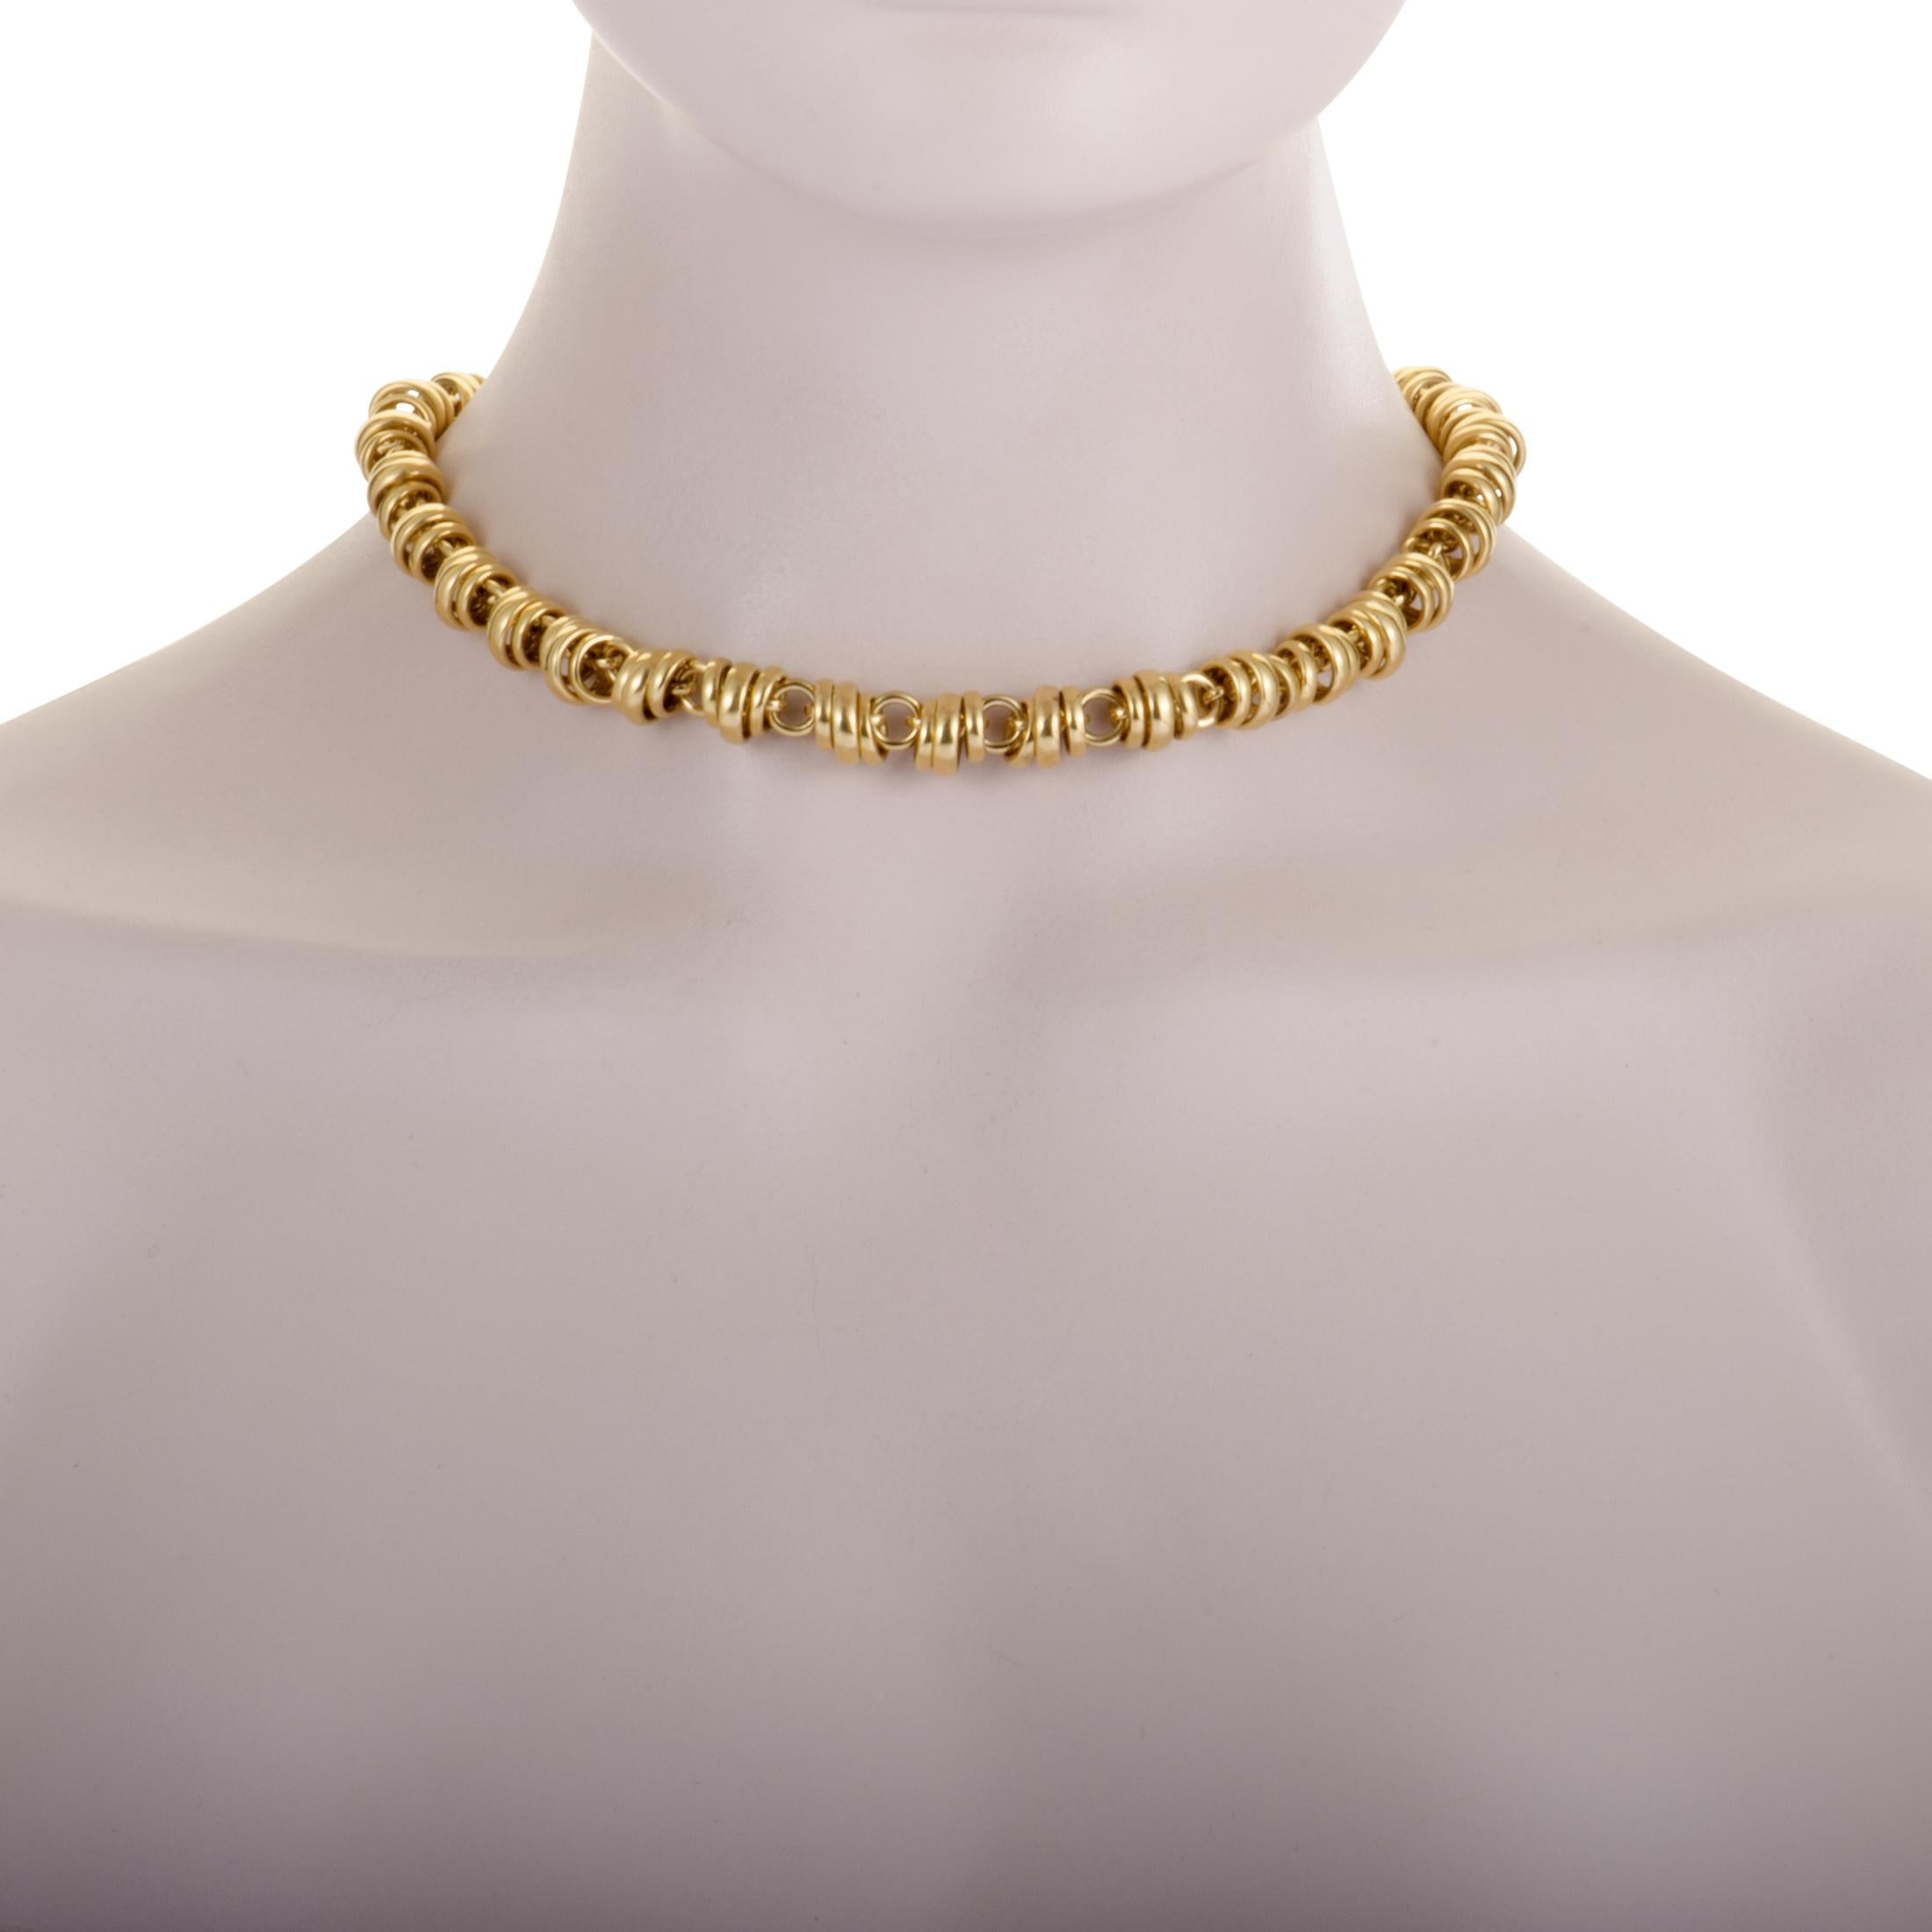 The ever-luxurious 18K yellow gold is presented at its finest in this stunning necklace, compelling with its eye-catching color and alluring sheen. The necklace is wonderfully designed by Pomellato and weighs 136.6 grams.